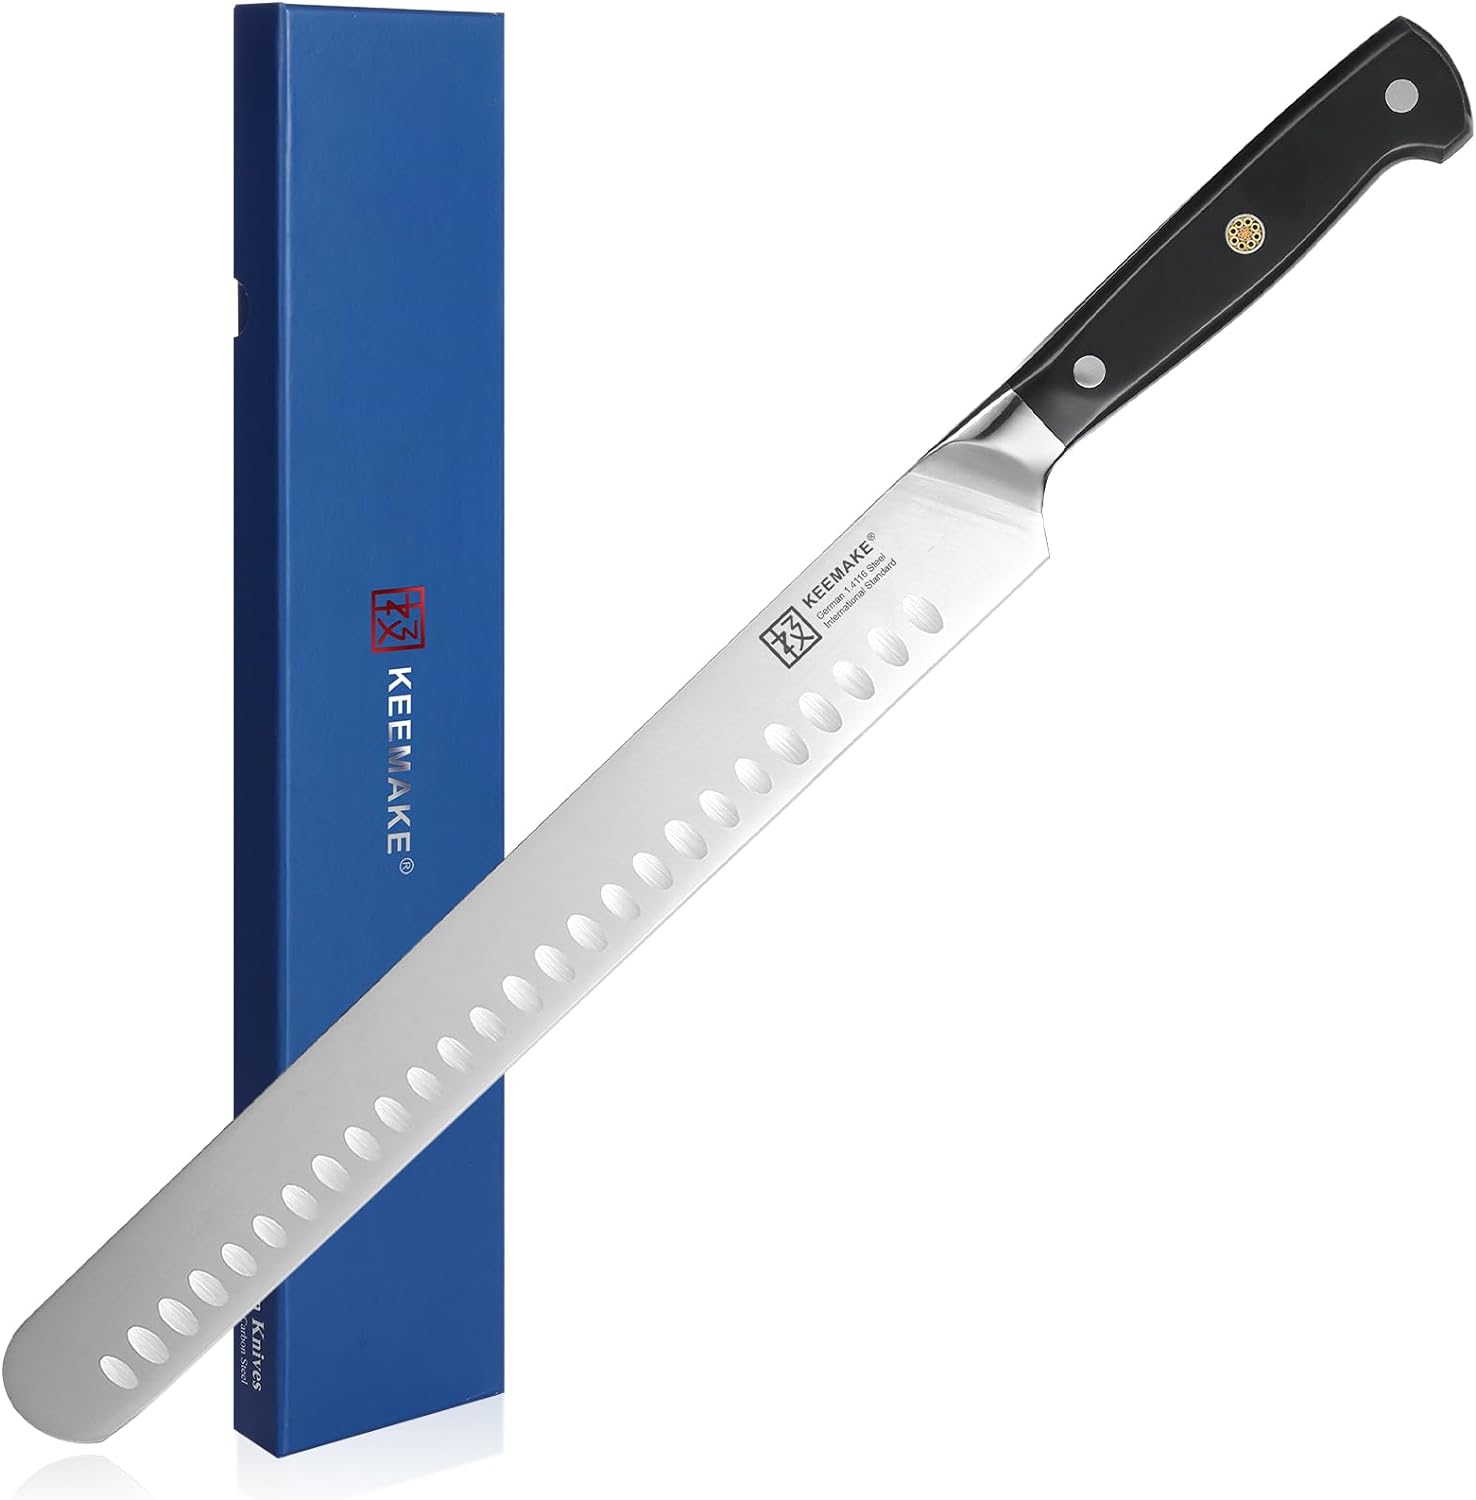 KEEMAKE Slicing Knife 12 inches, Carving Knife with High Carbon Stainless Steel for Ham Cutting